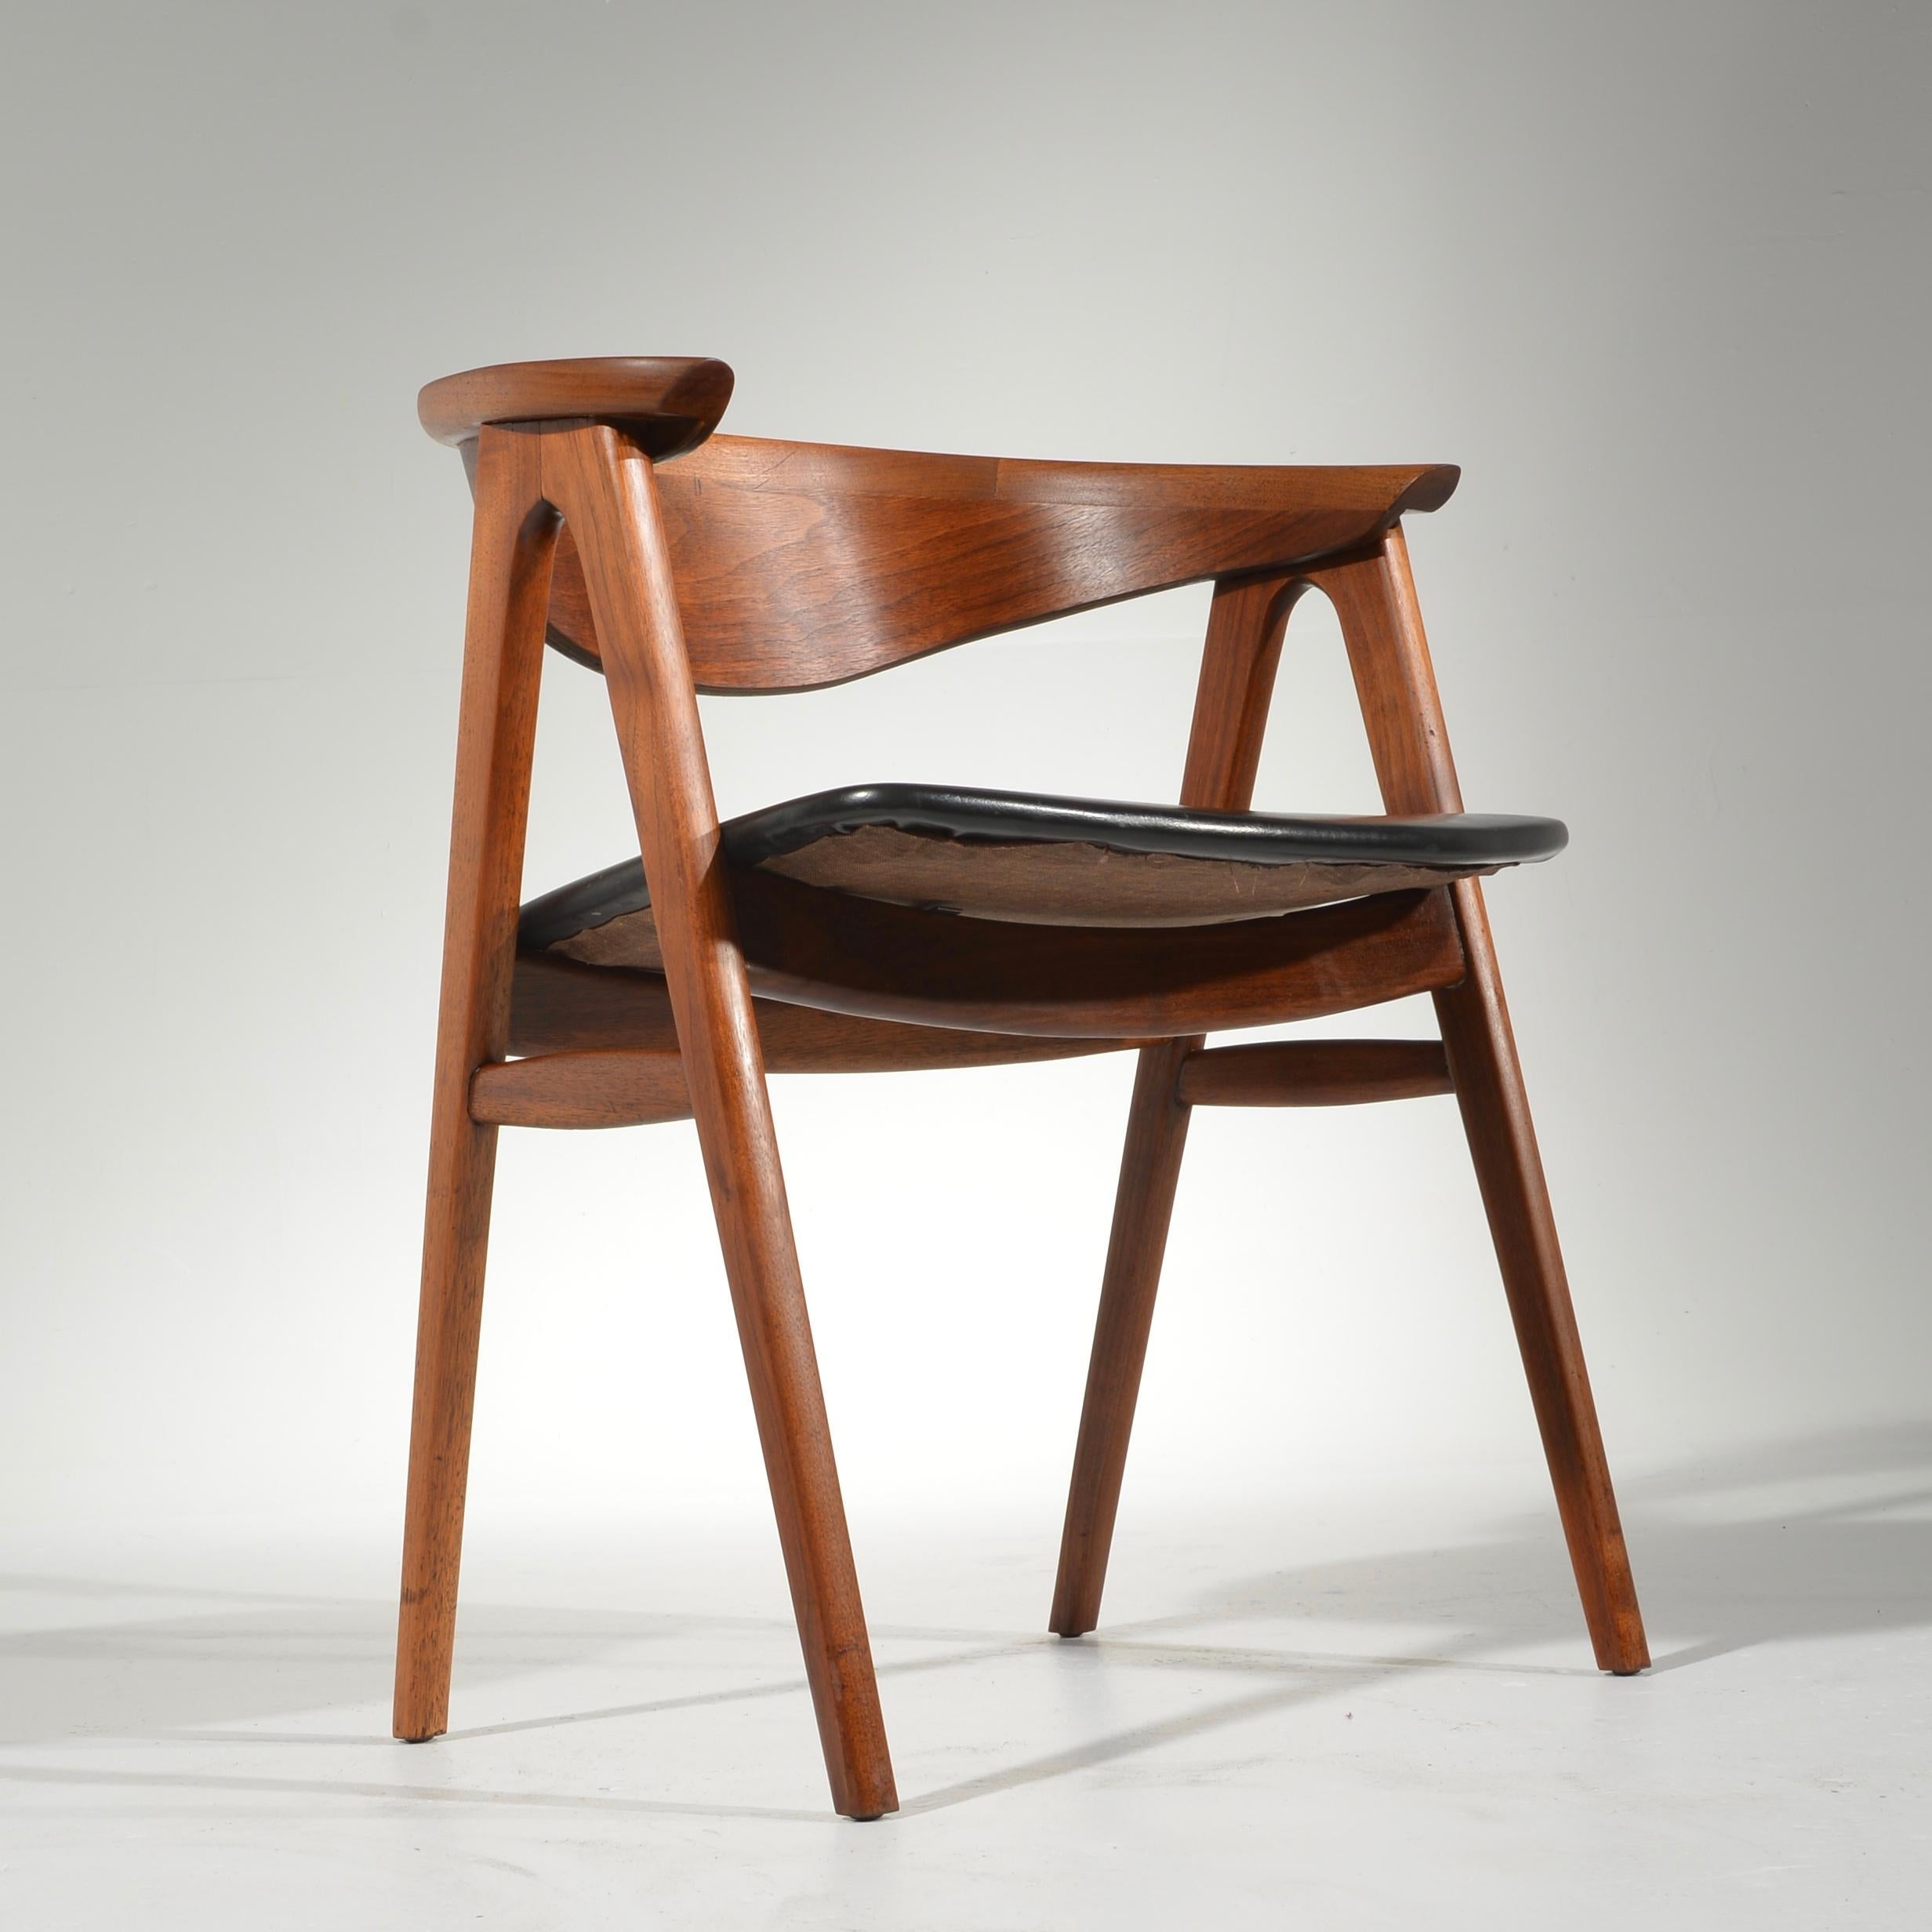 Erik Kirkegaard designed this model 52 armchair for Høng Stolefabrik in 1952. 
All chairs have been fully restored including walnut finish and joinery. Shown with original upholstery, please inquire for re-upholstery options.